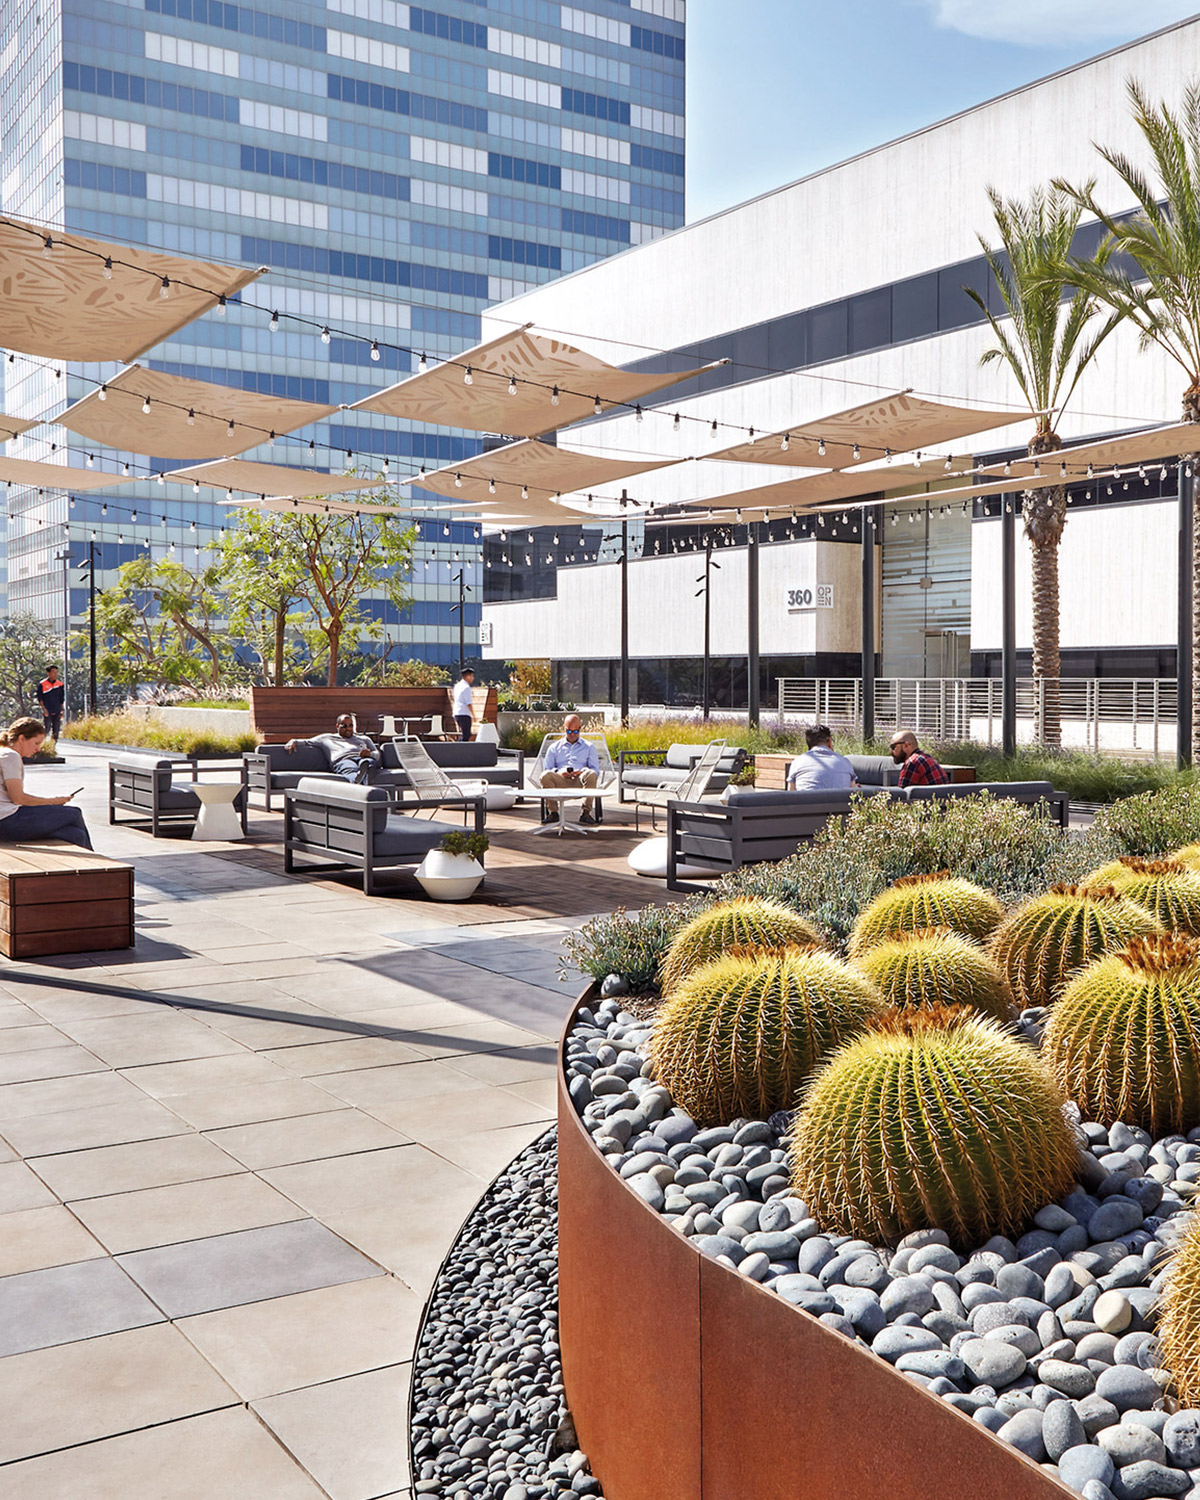 A modern terrace furnished with comfortable seating amidst lush potted plants and cacti, under the shade of elegant pergolas with a backdrop of urban high-rise buildings.